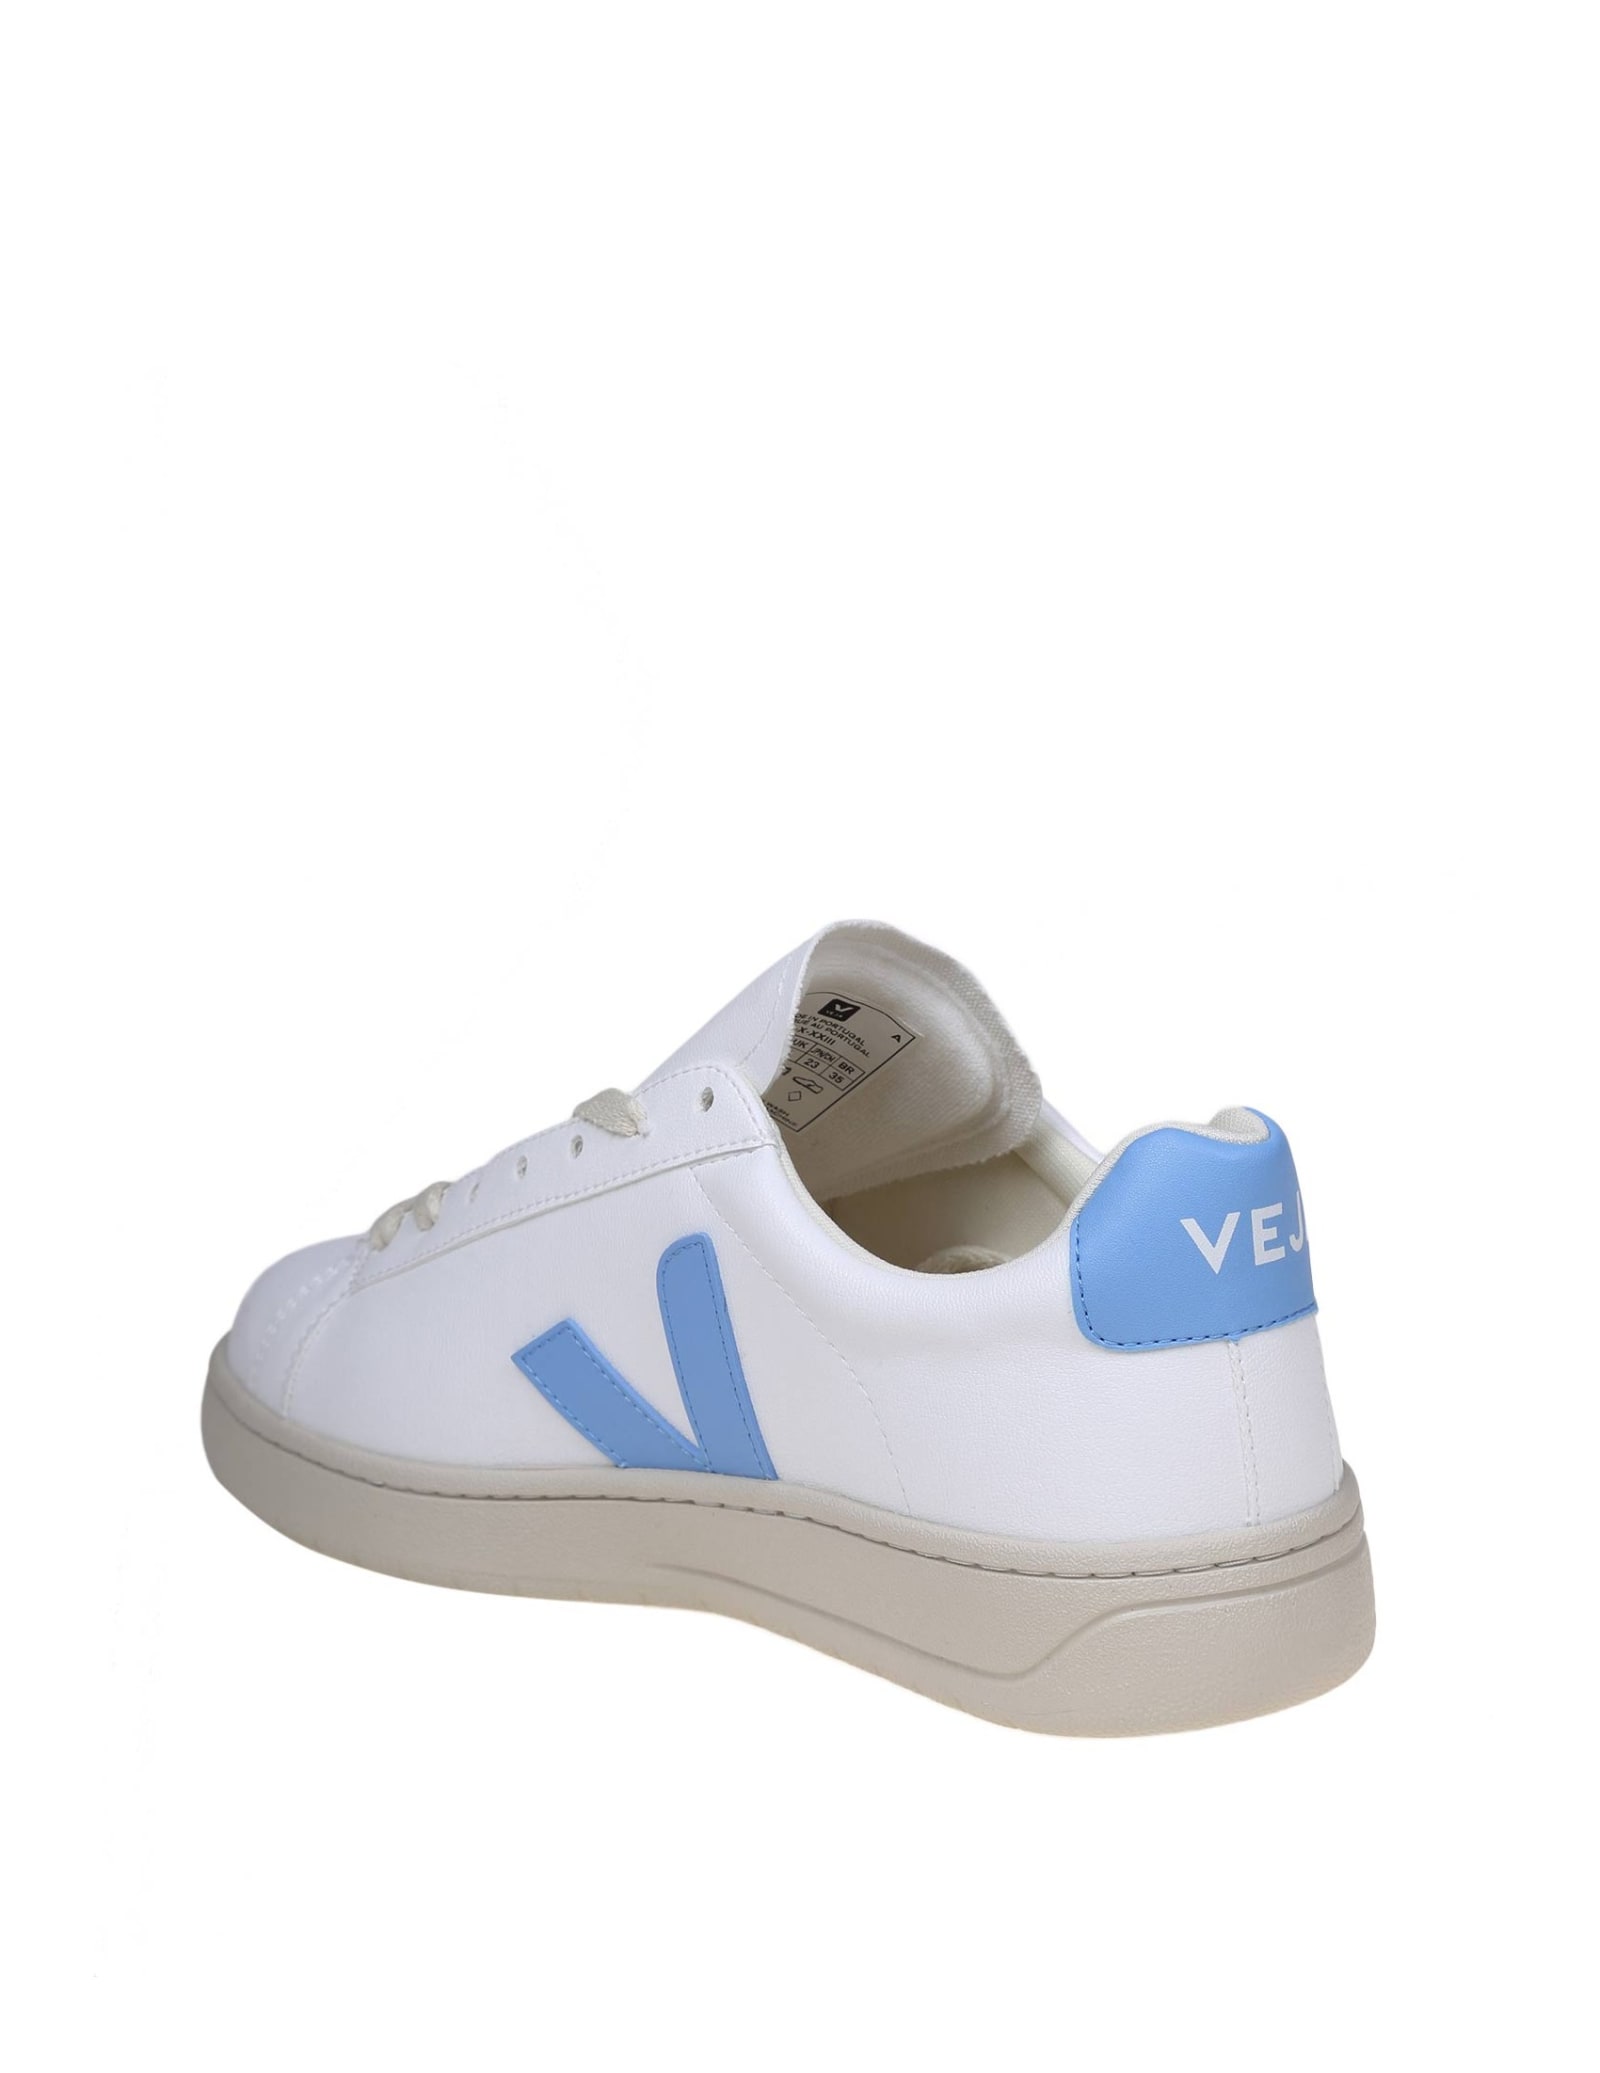 Shop Veja Urca Sneakers In White/light Blue Coated Cotton